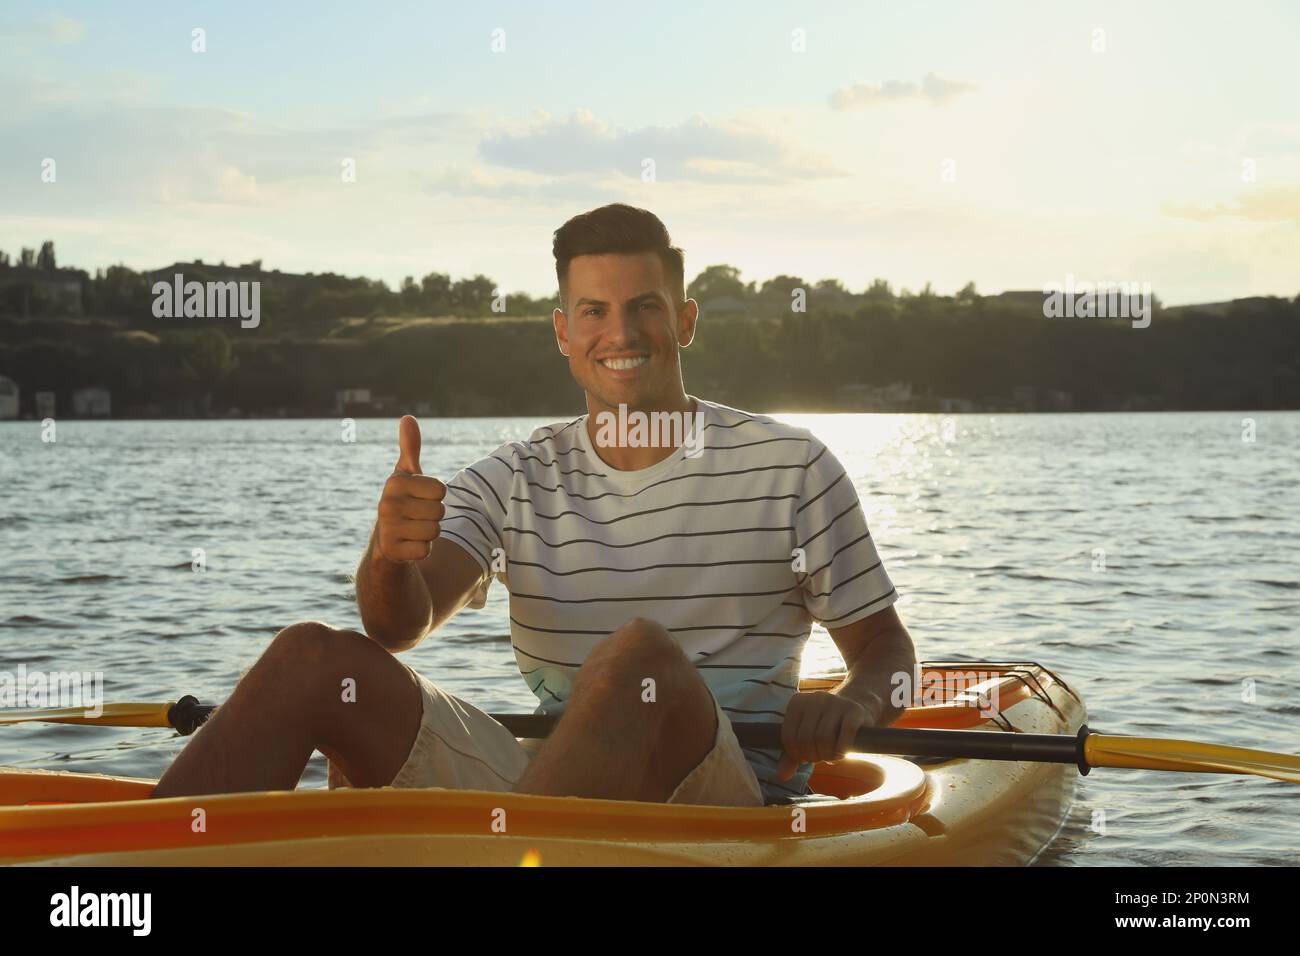 Happy man showing thumb up while kayaking on river. Summer activity Stock Photo